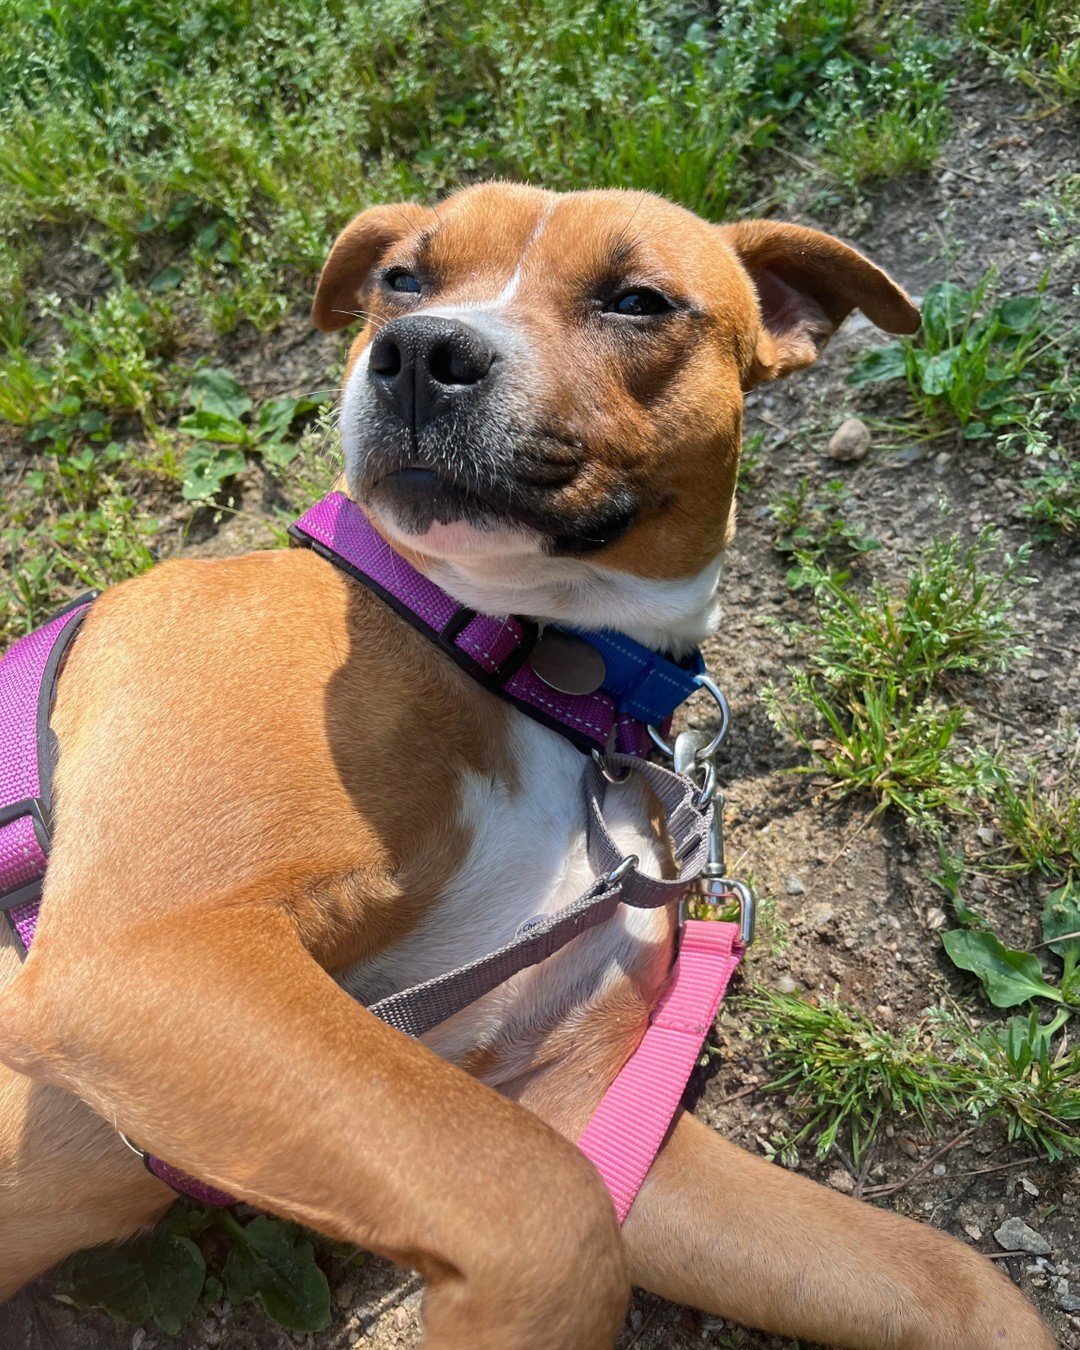 Rachel wanted to remind you all that our Weekend of Love Mother's Day Adoption Special starts today!

Now through Sunday we are lowering our adoption fee for adult cats and dogs to $12.

Stop by to find your new furry friend and welcome love into you